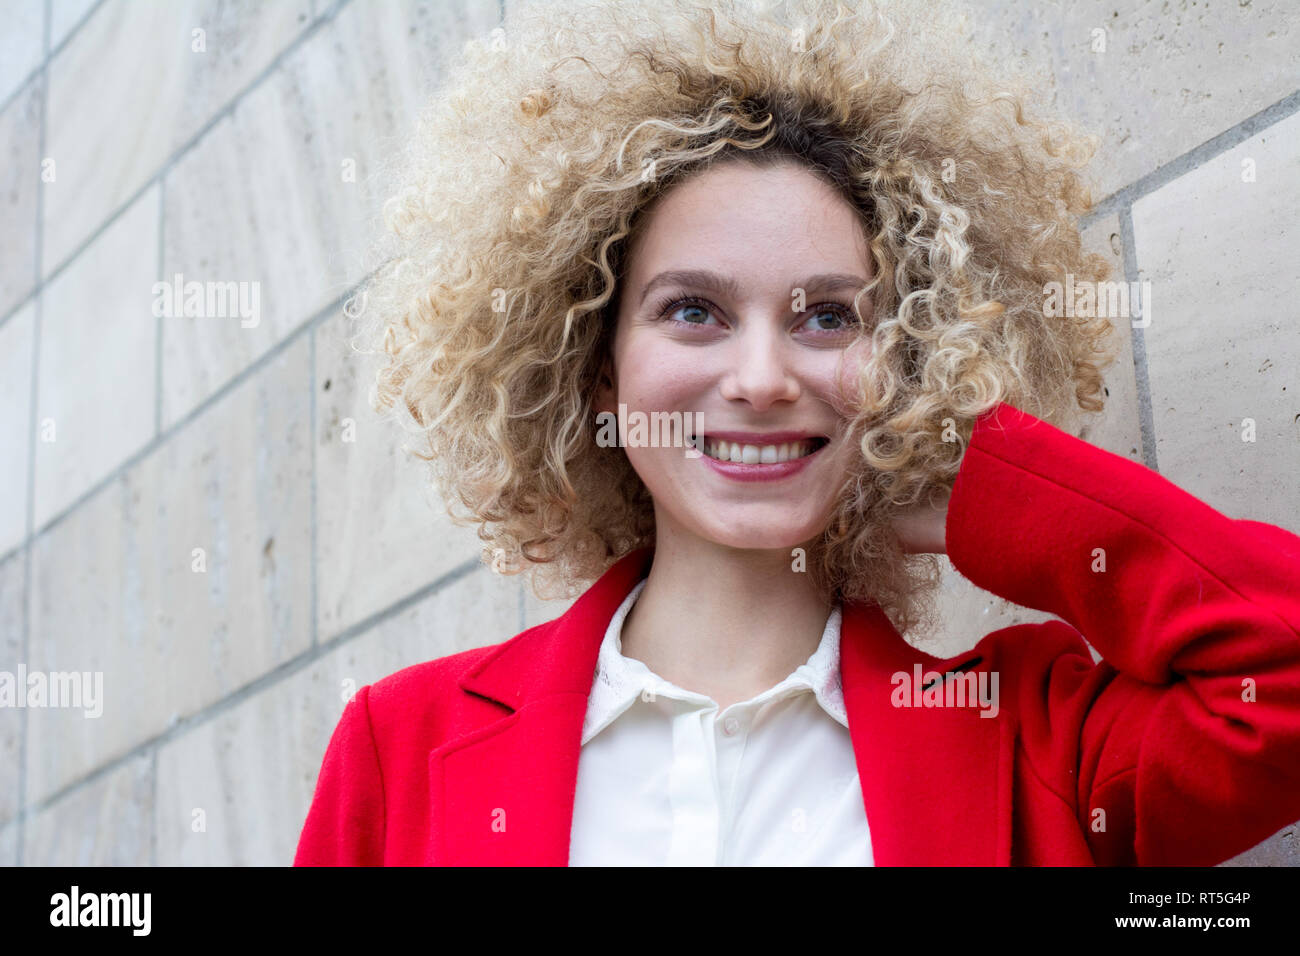 Portrait of smiling blond woman with ringlets Stock Photo